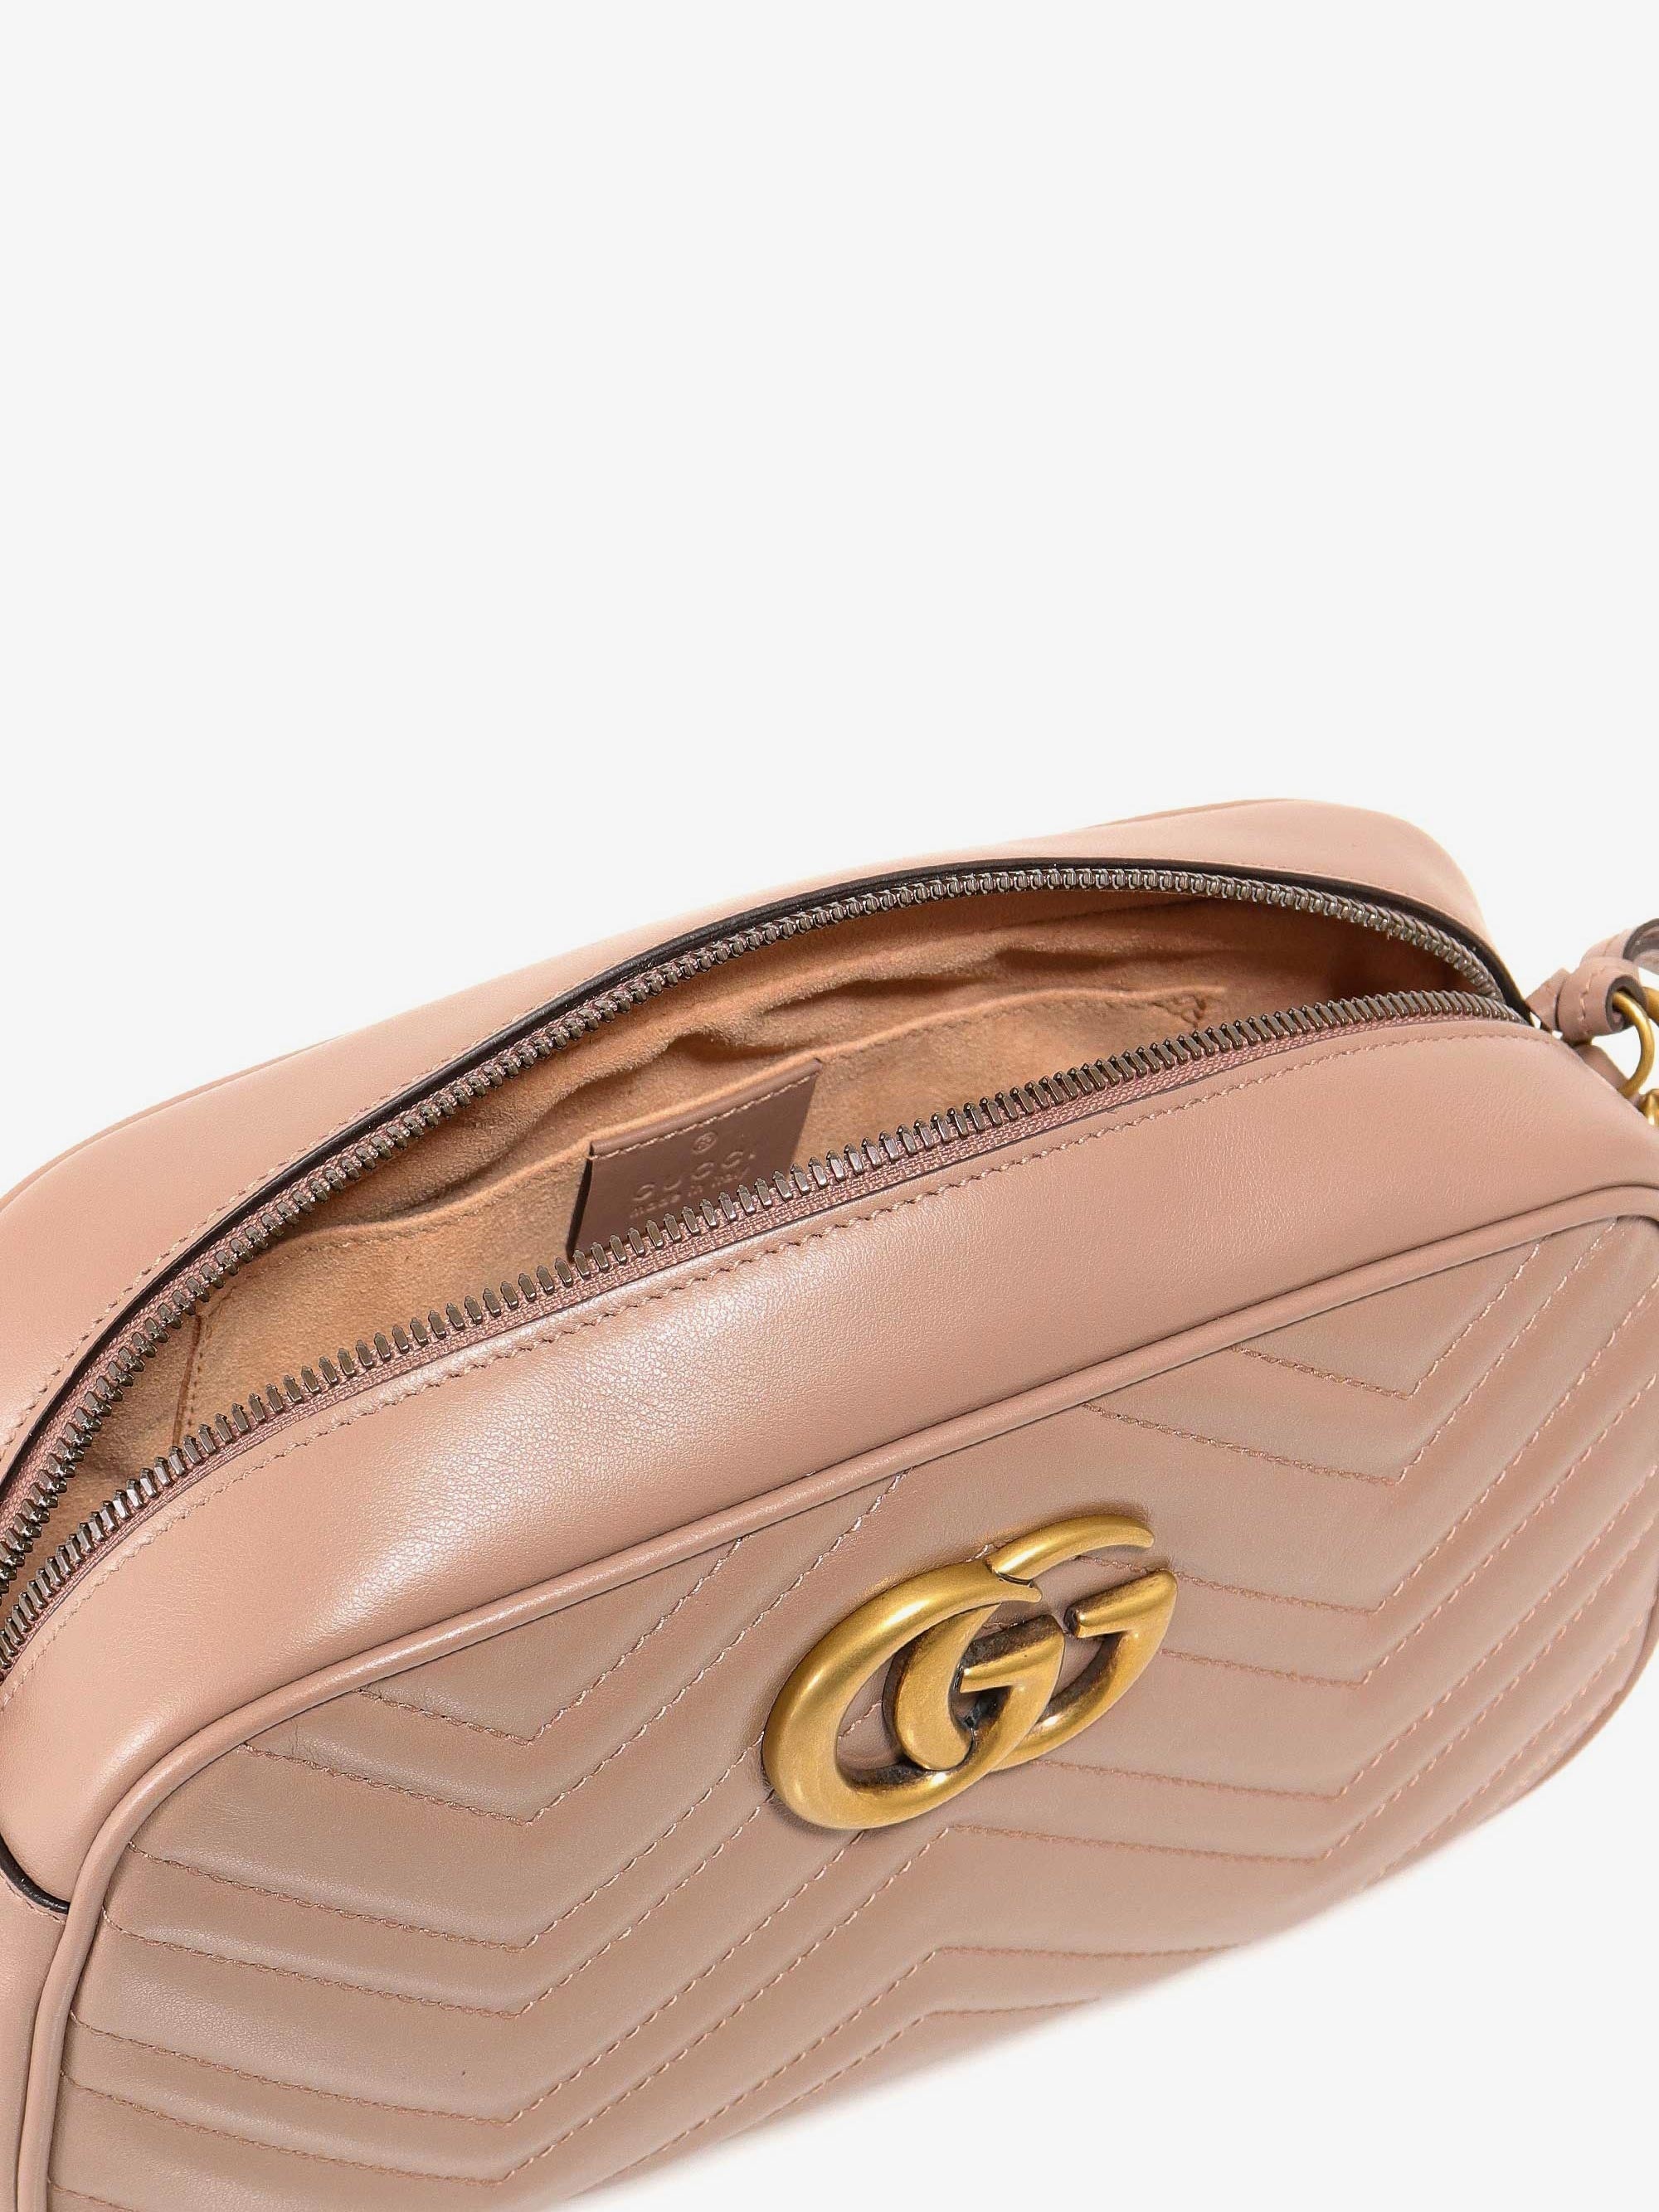 Gucci Woman Gg Marmont Woman Pink Shoulder Bags - 4